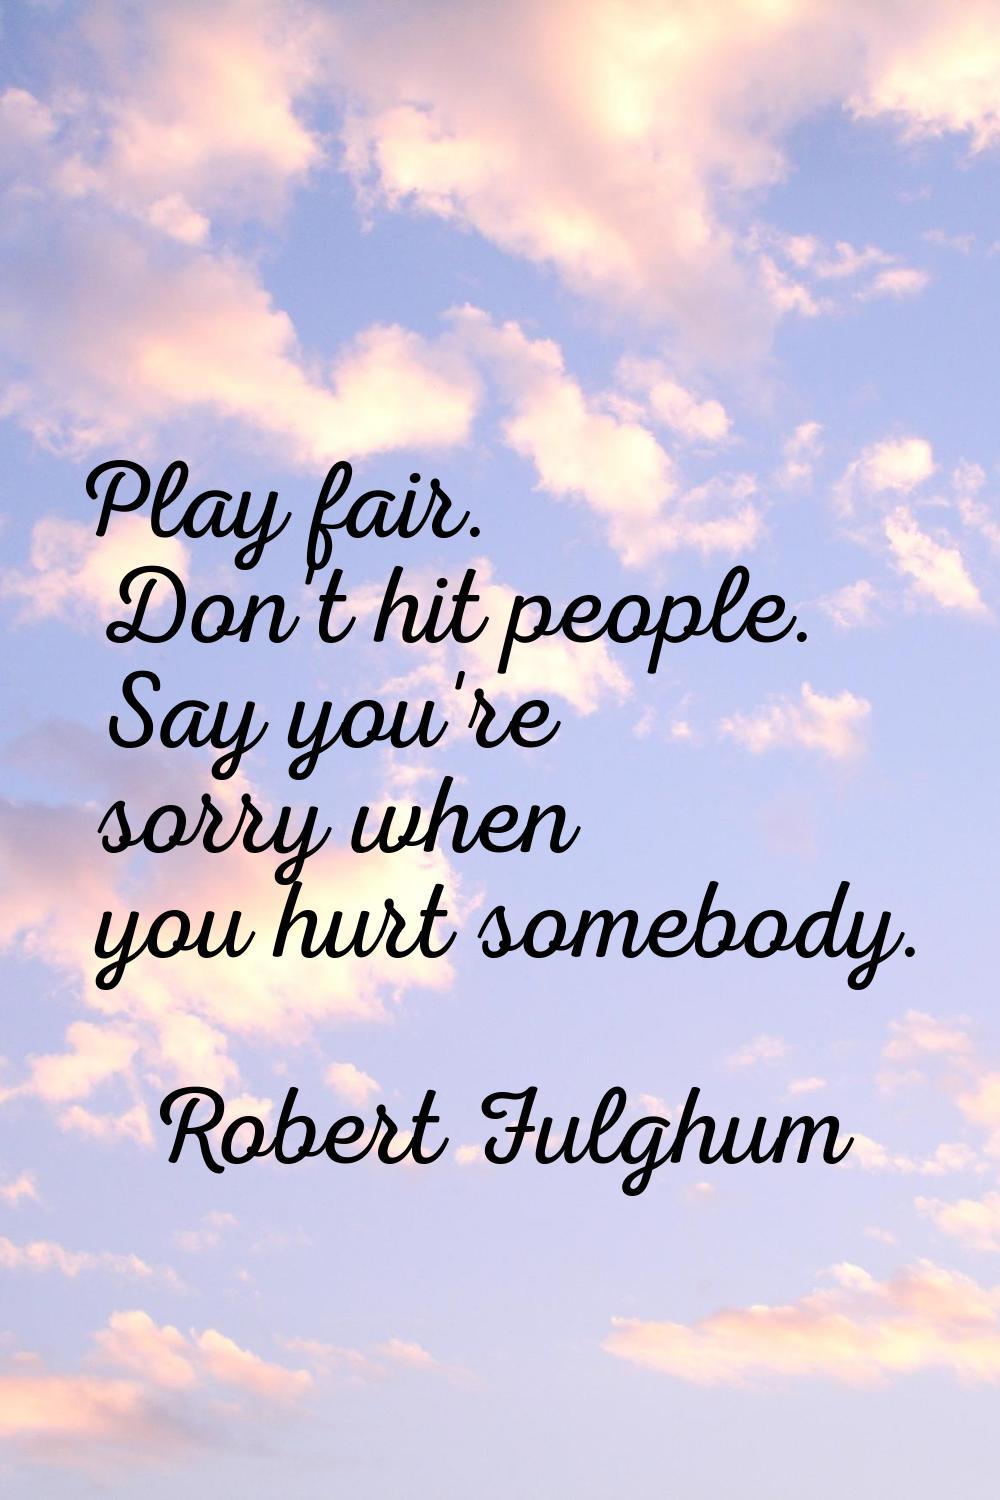 Play fair. Don't hit people. Say you're sorry when you hurt somebody.